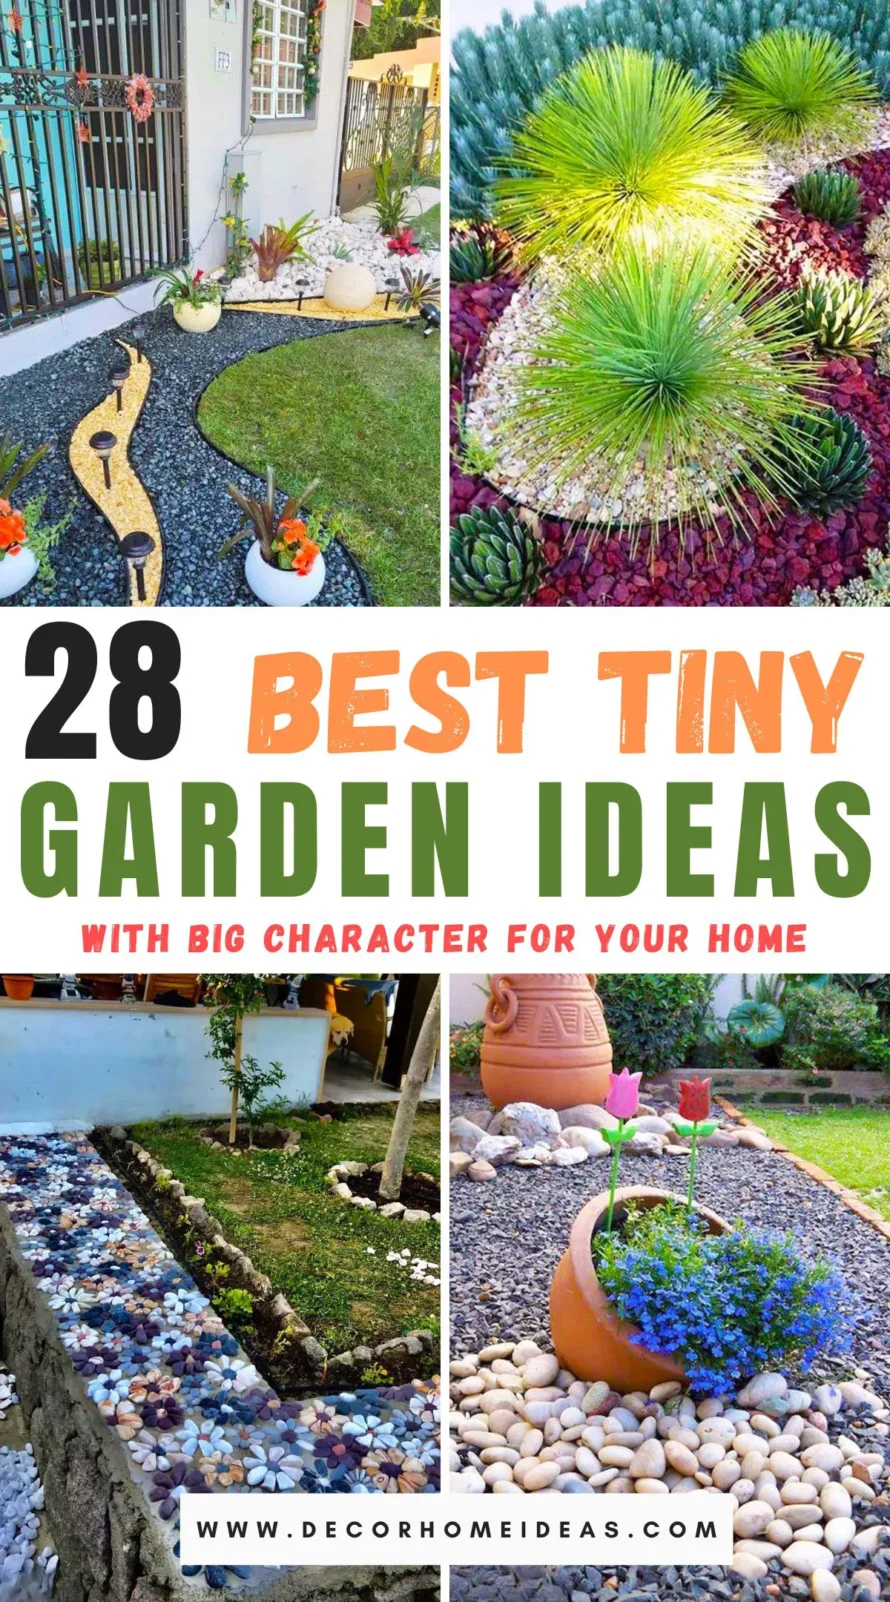 Explore 28 small garden designs that pack a big punch in character and charm. Perfect for any home, these tiny gardens showcase creative use of space and unique elements that make each one a standout. Get inspired to bring big personality to your small outdoor area!